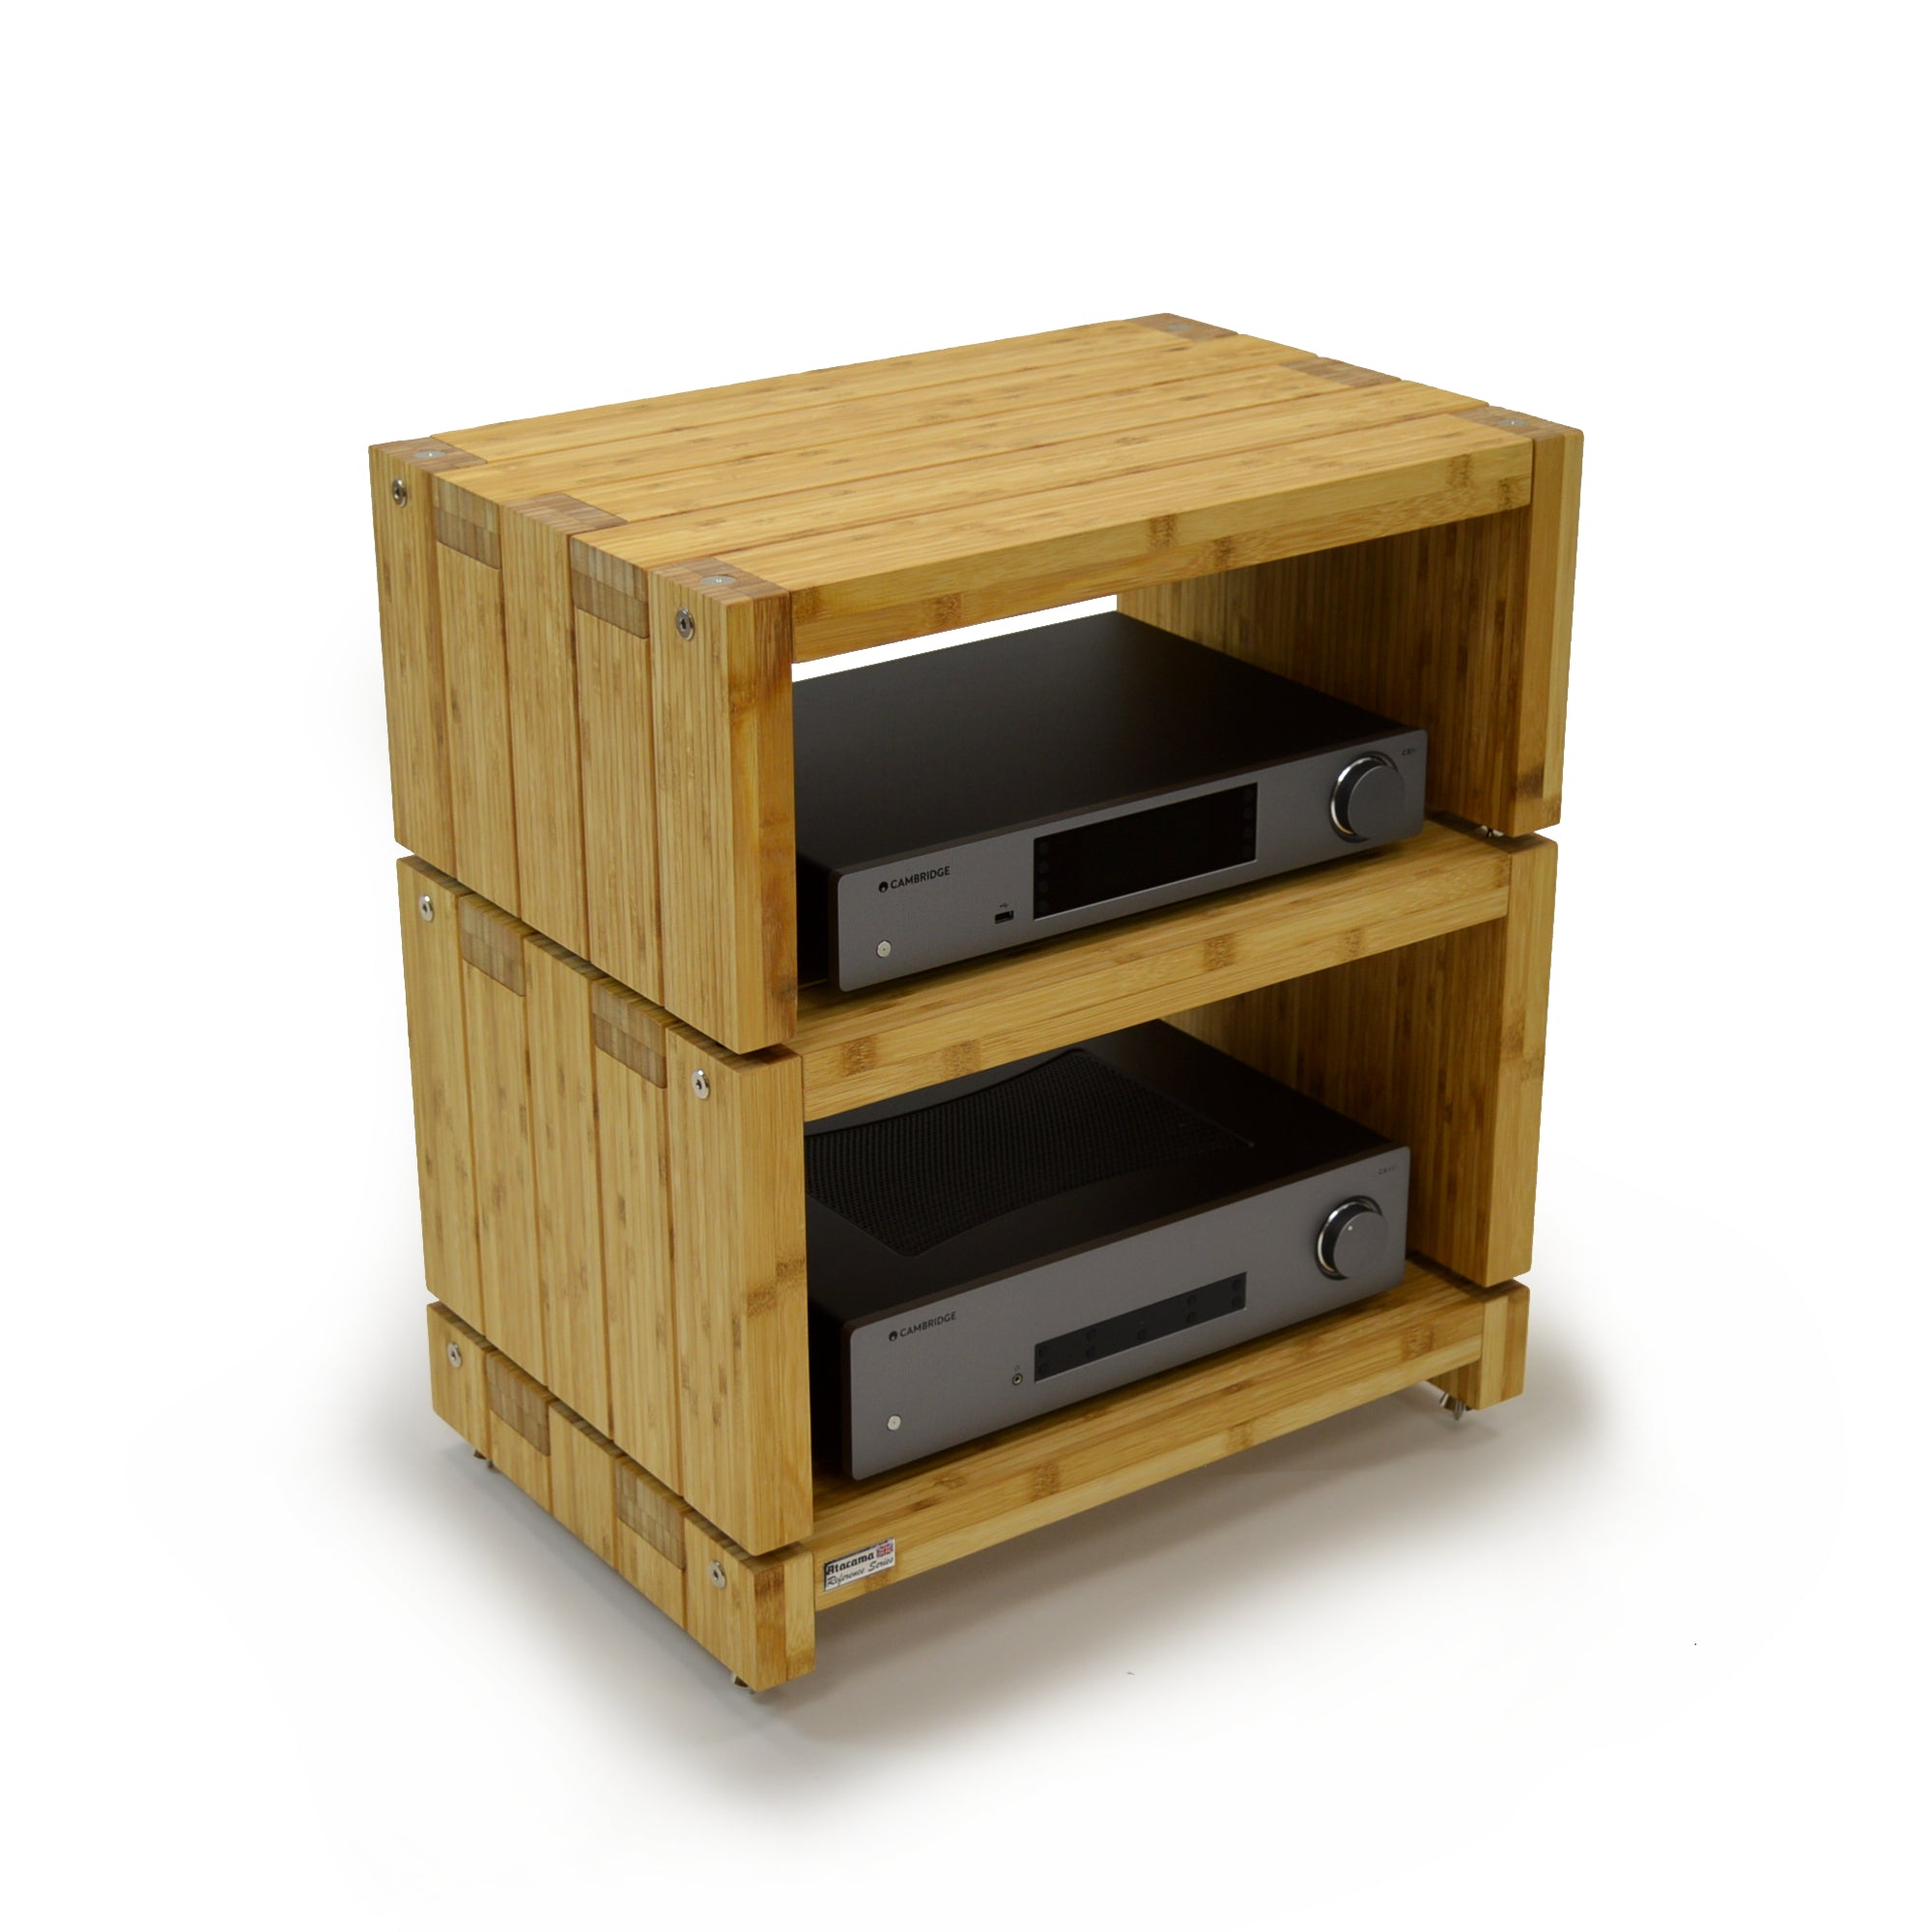 Ex Display Elite Eco 24 Reference Natural Bamboo HiFi Rack (Price shown is for 4 modules)